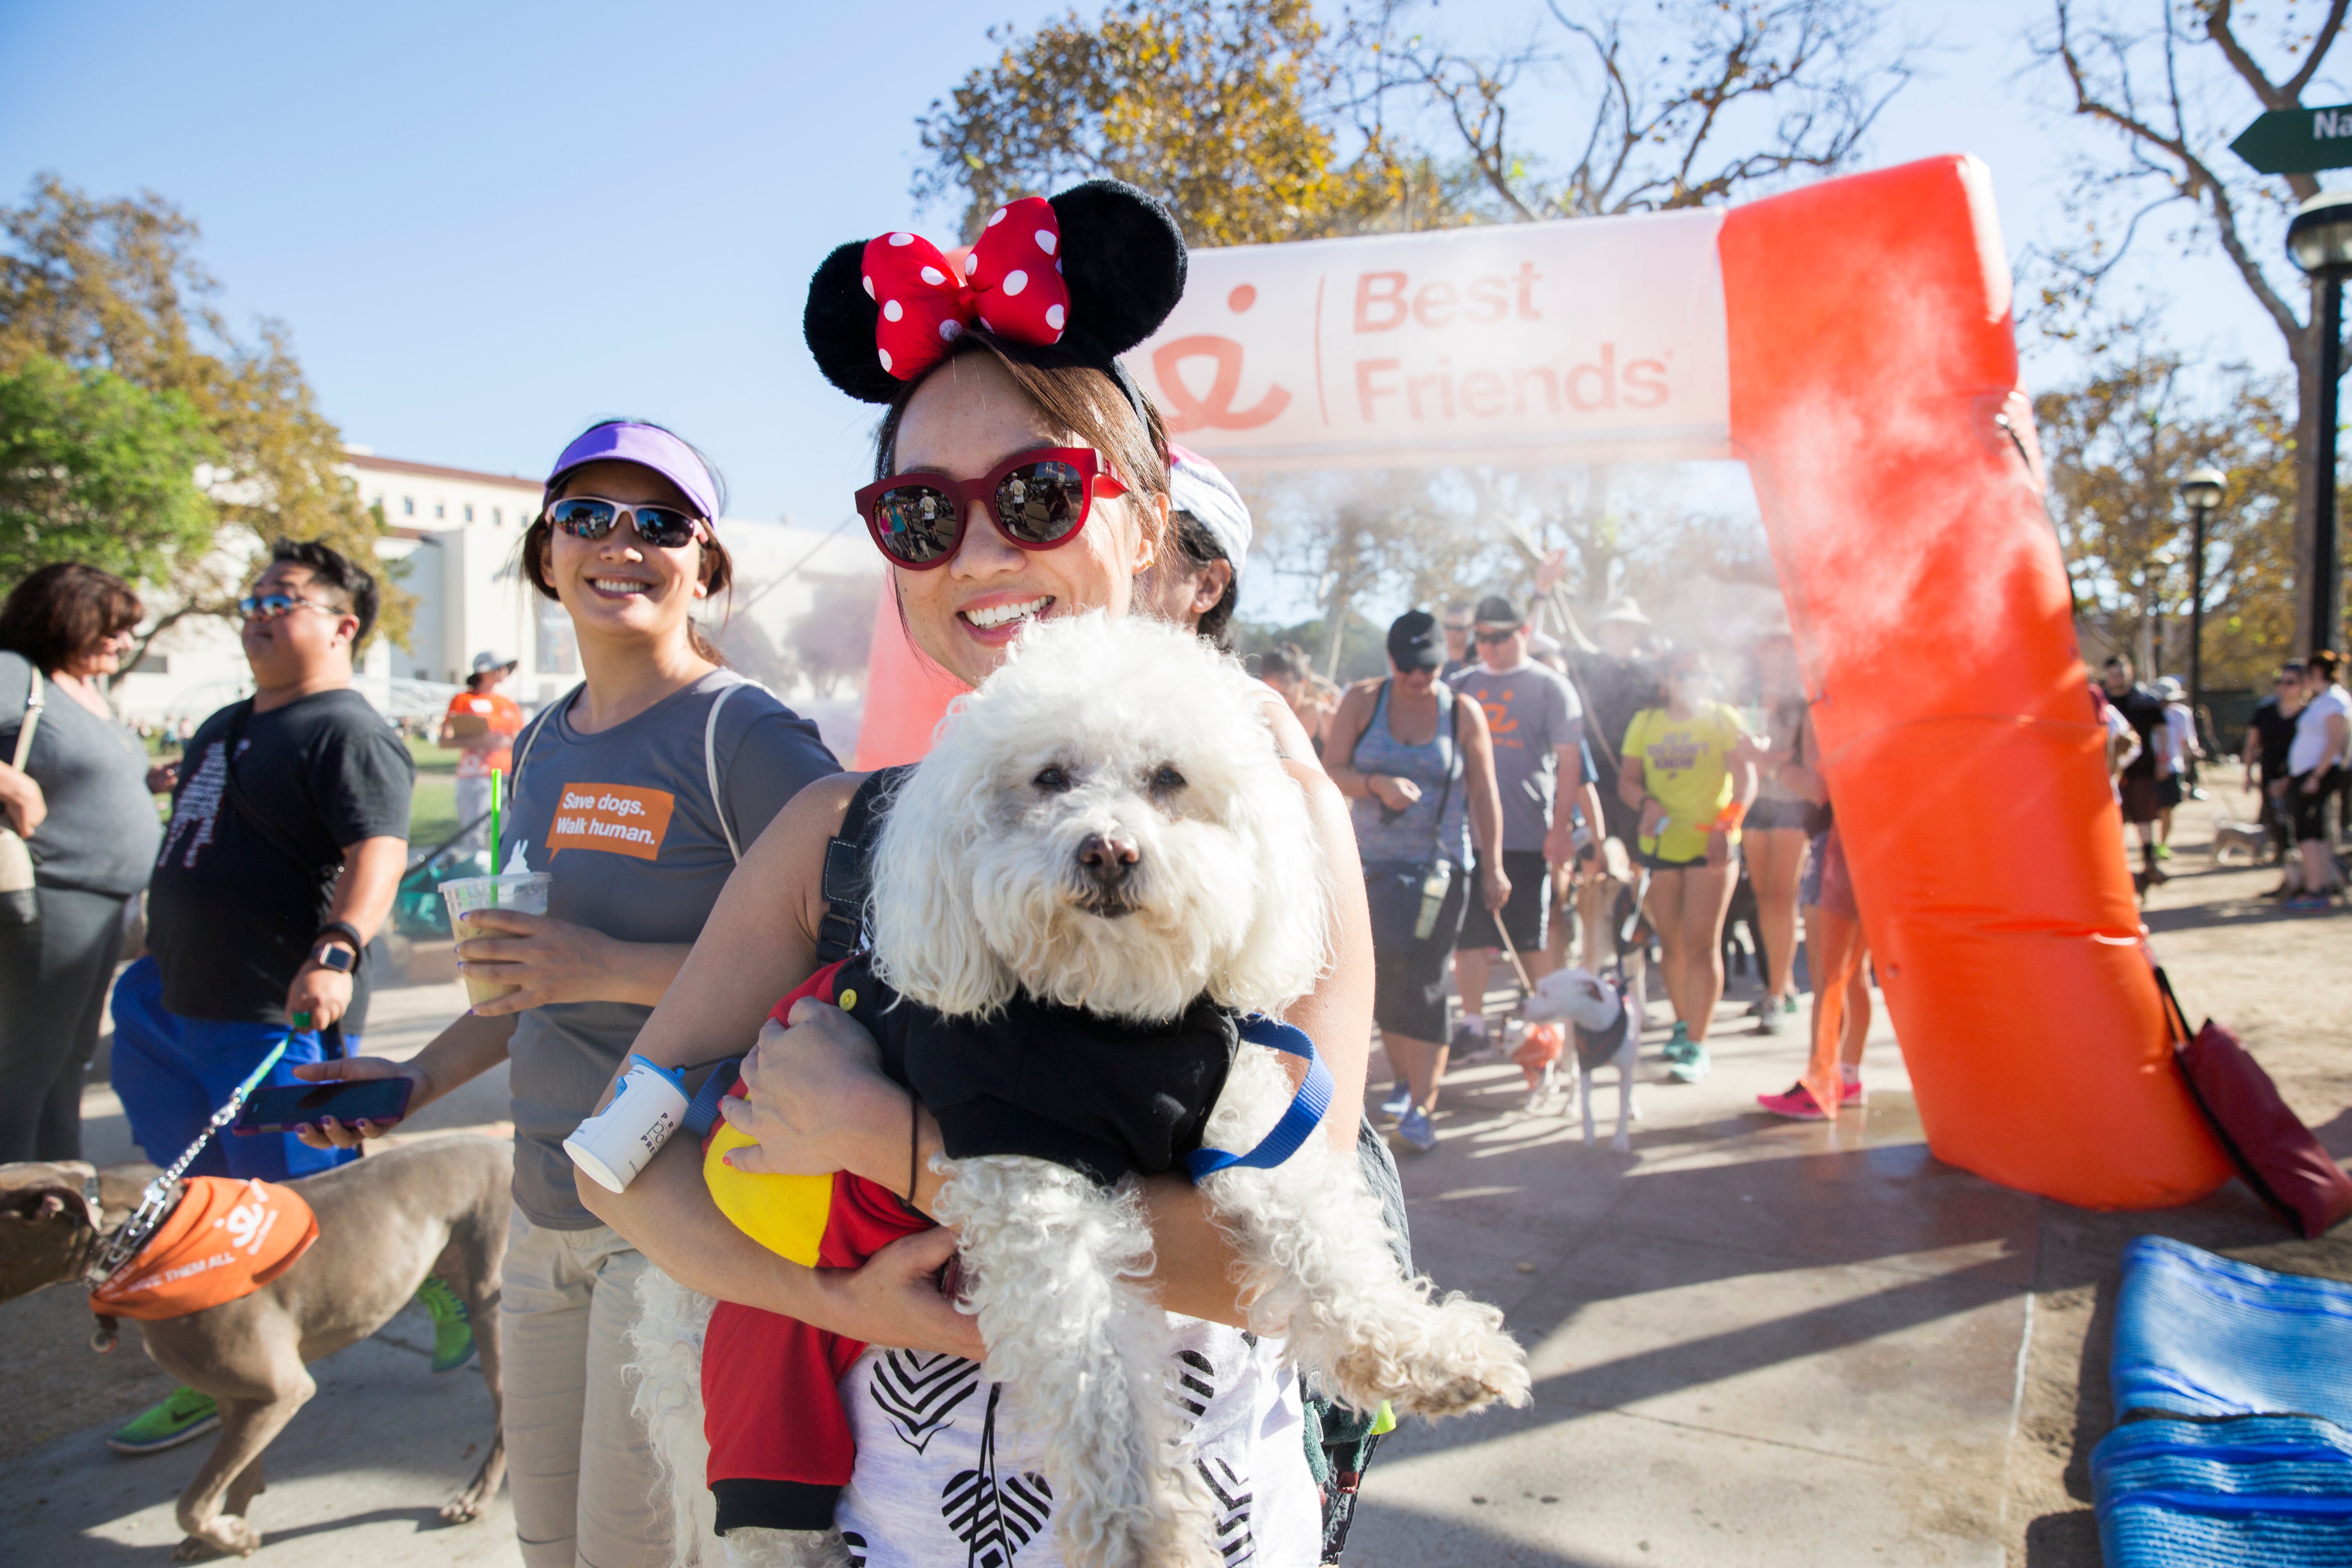 In 2015, nearly 13,000 participants across the country strutted their mutts and raised over $2 million for homeless pets all while making new friends and having fun.